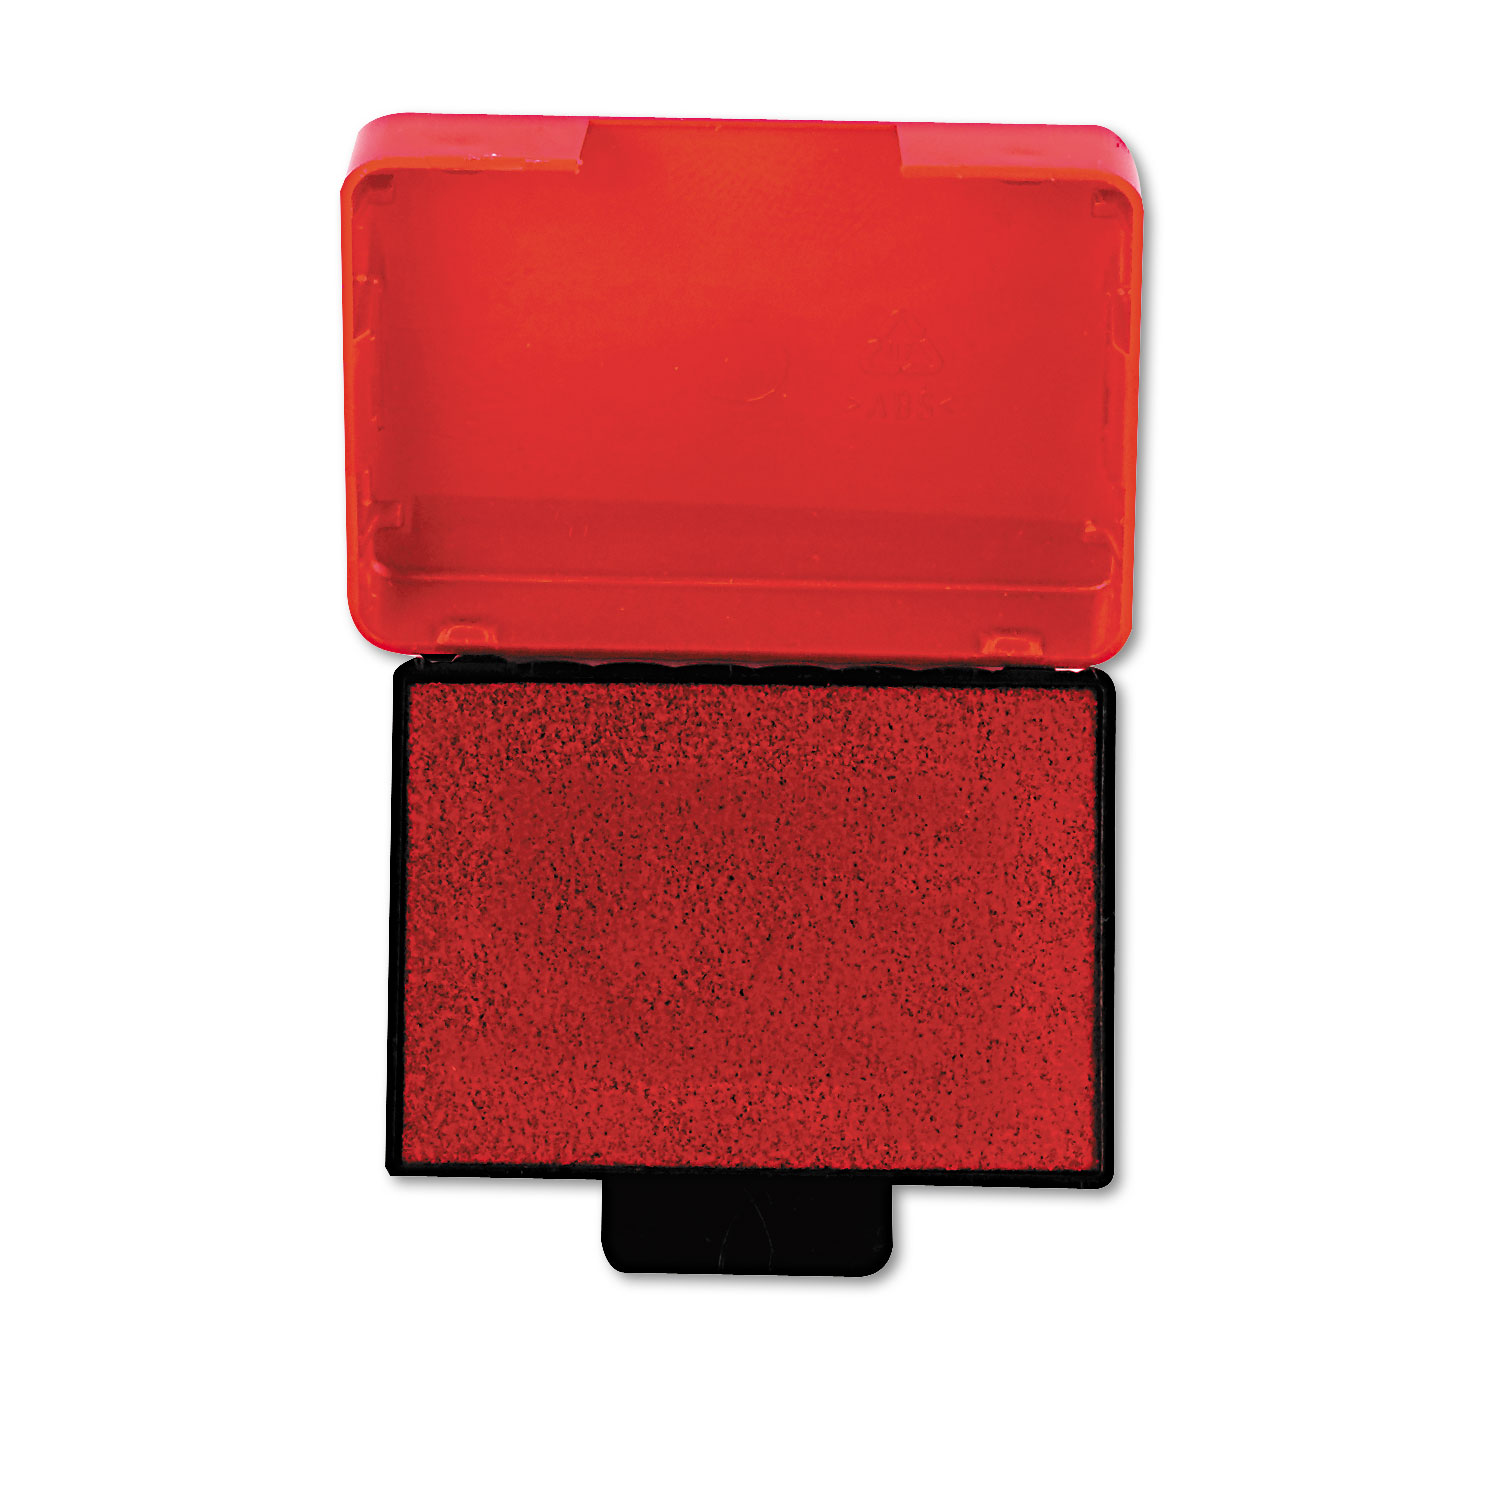  Identity Group P5430RE Trodat T5430 Stamp Replacement Ink Pad, 1 x 1 5/8, Red (USSP5430RD) 